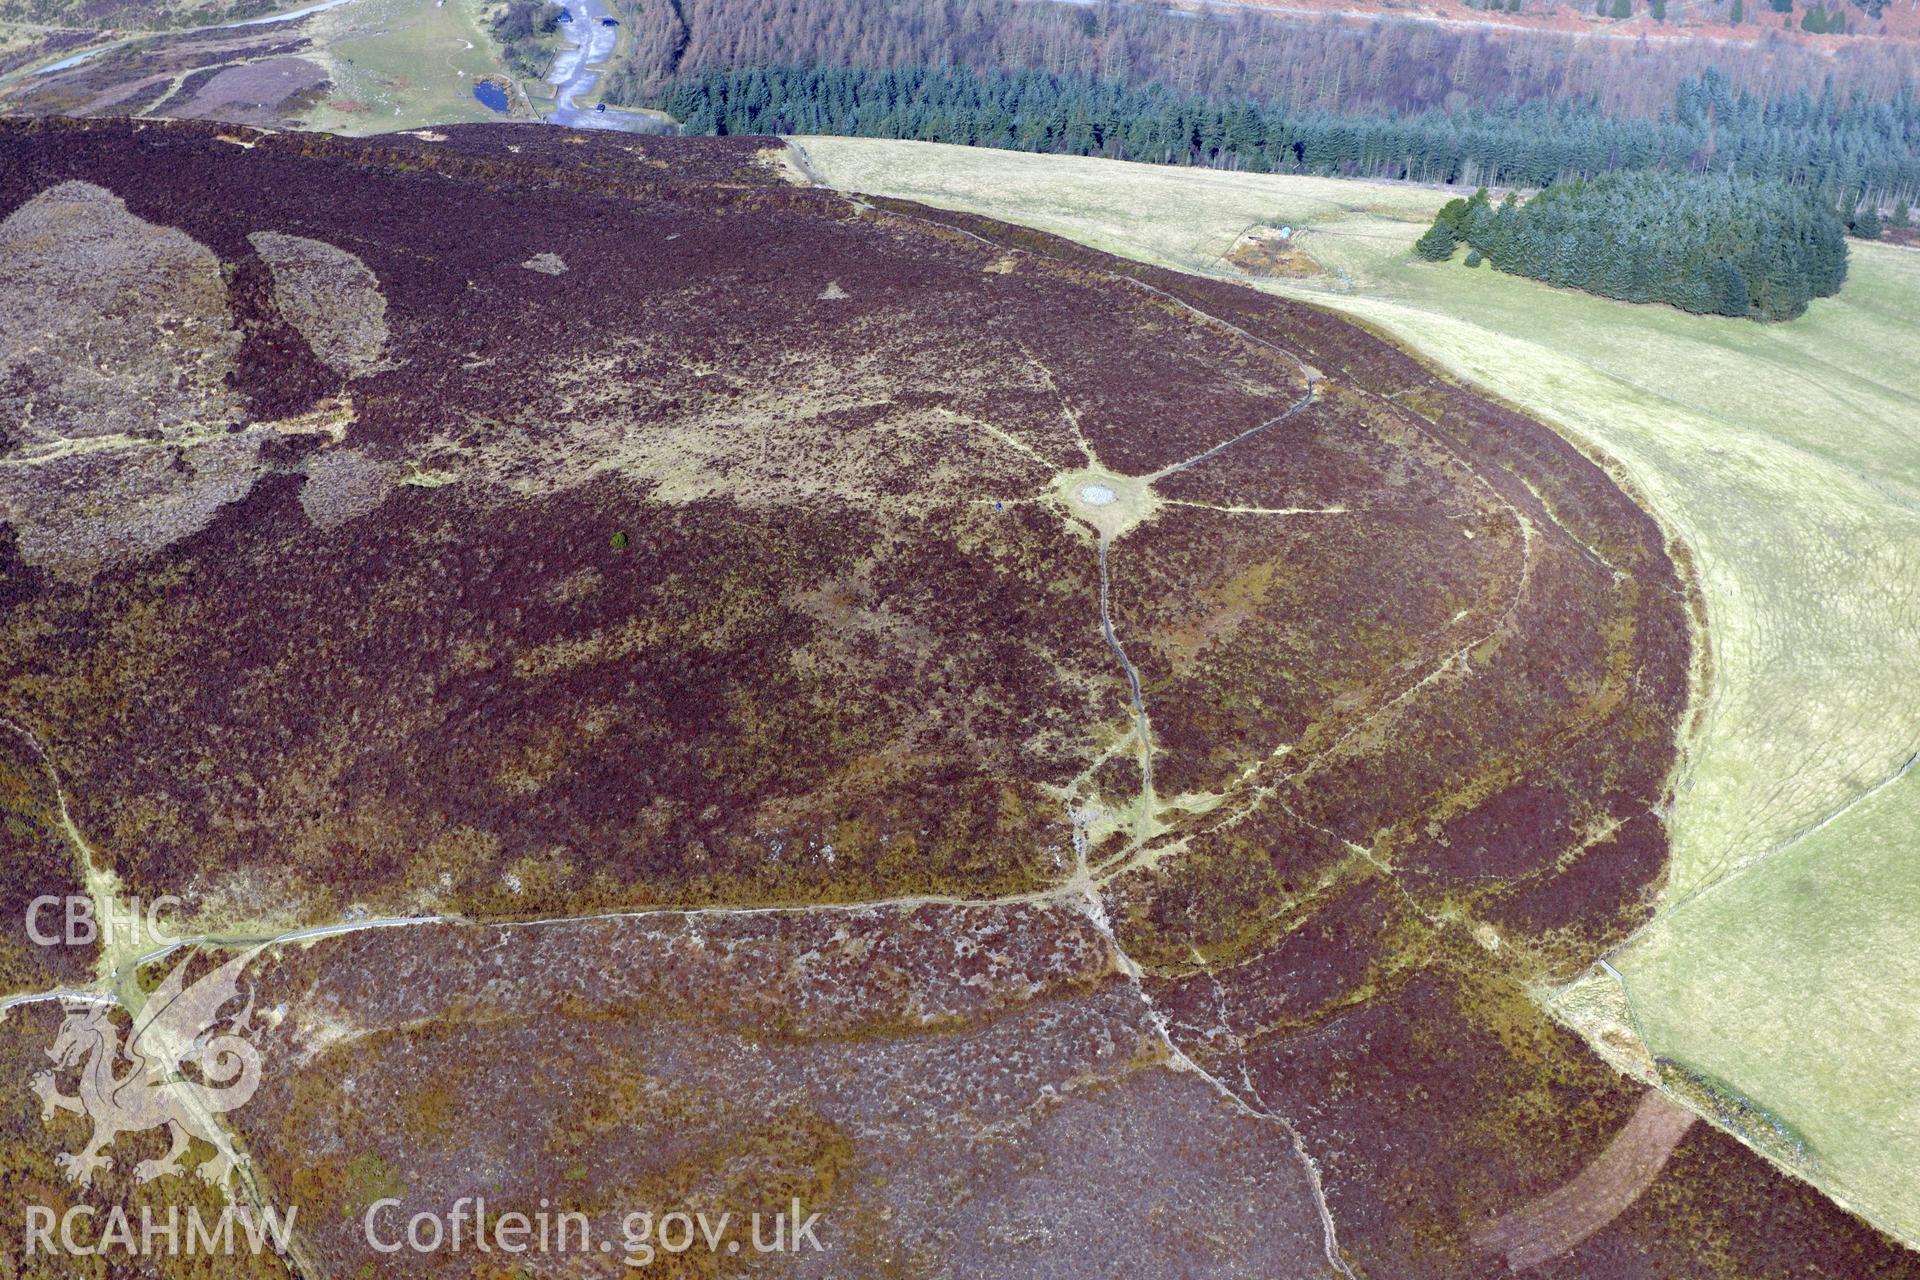 Foel Fenlli Hillfort and Cairn, between Ruthin and Mold. Oblique aerial photograph taken during the Royal Commission?s programme of archaeological aerial reconnaissance by Toby Driver on 28th February 2013.